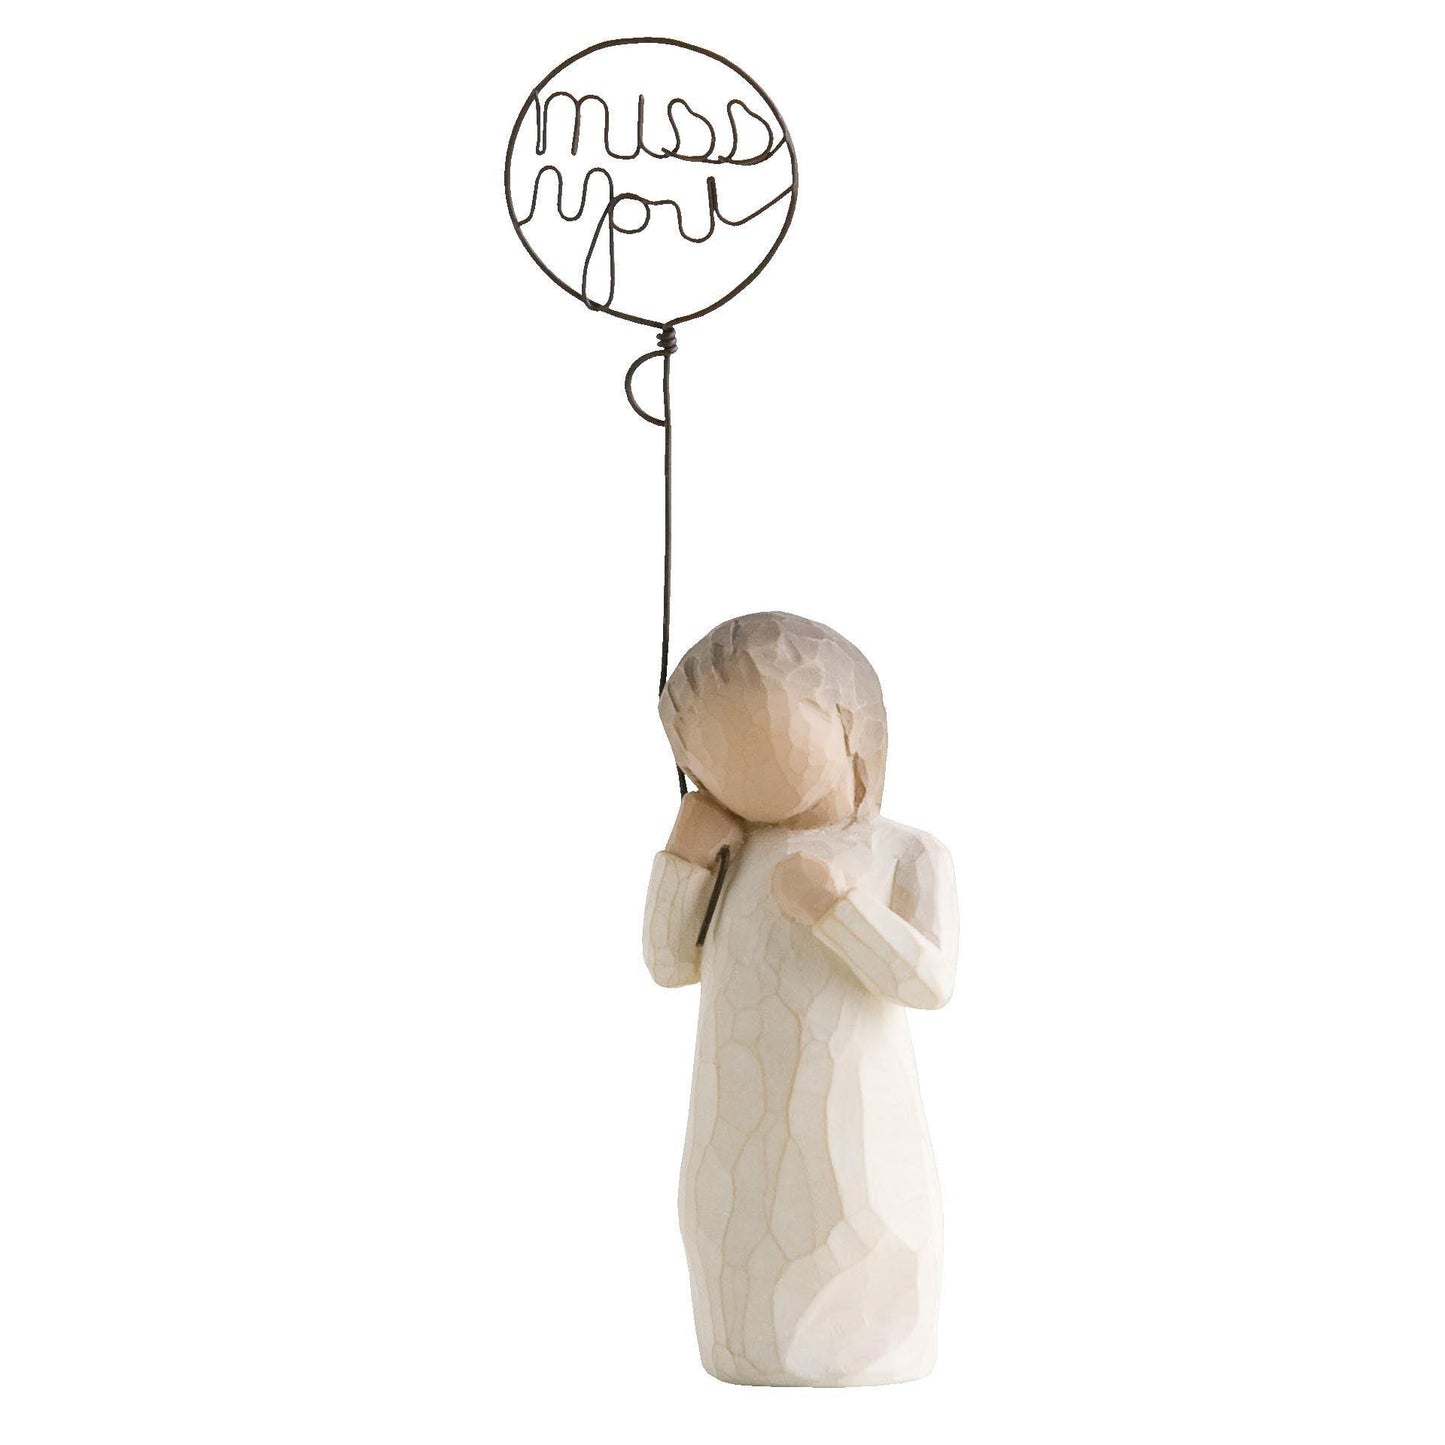 Willow Tree - Miss You (Willow Tree) - Gallery Gifts Online 